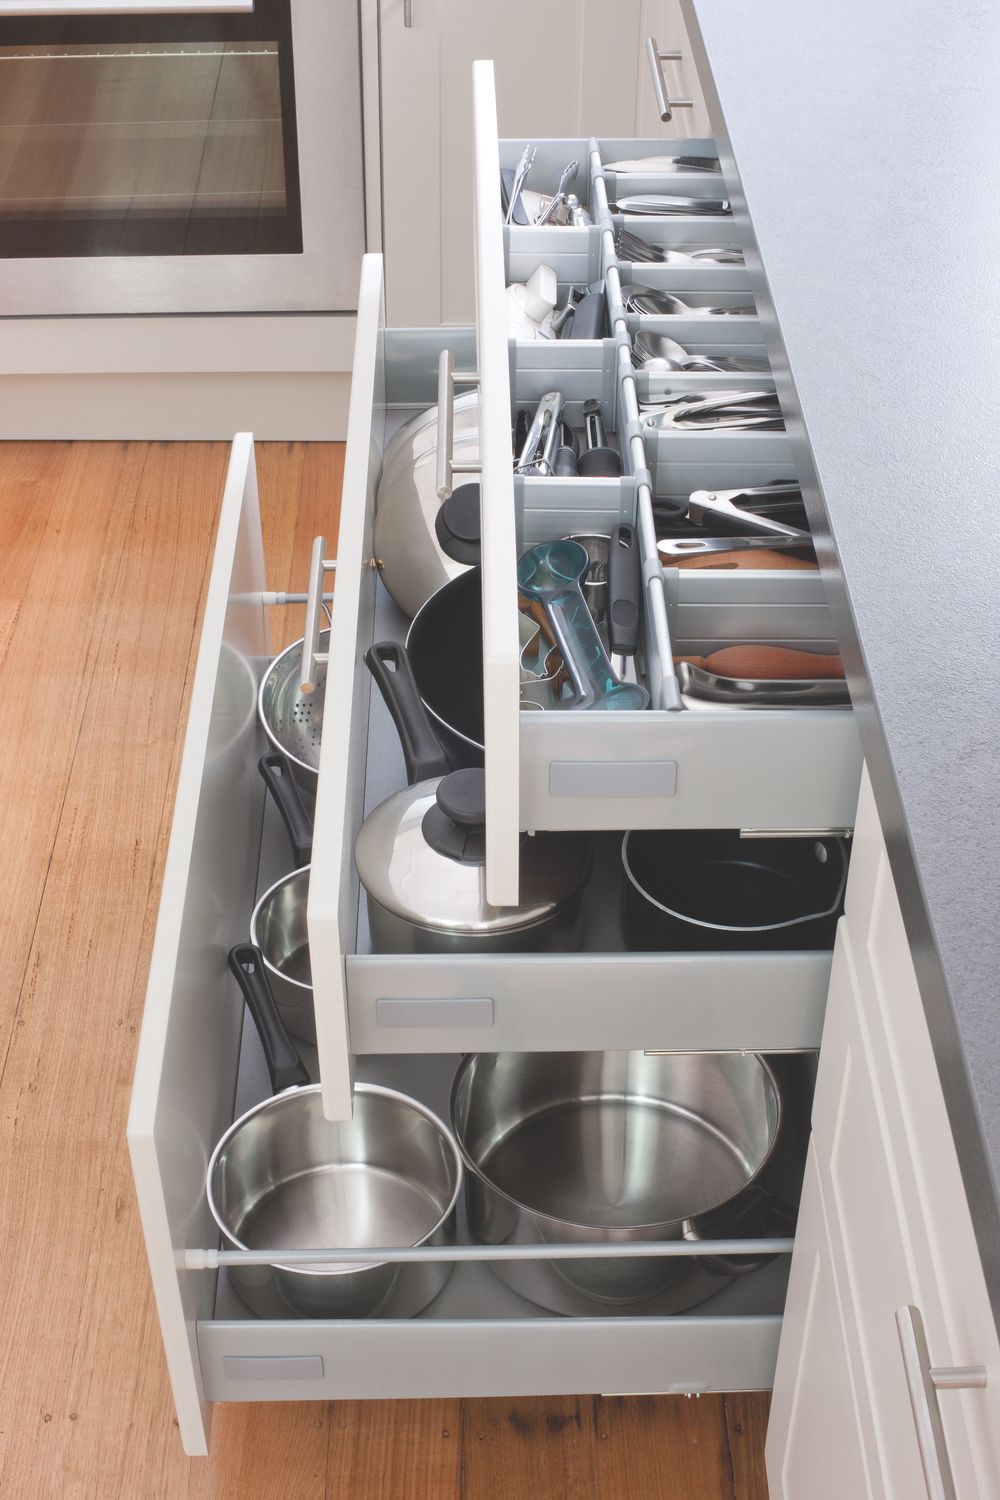 Kitchen Drawers: Organizational and Functional Solutions for Your Kitchen